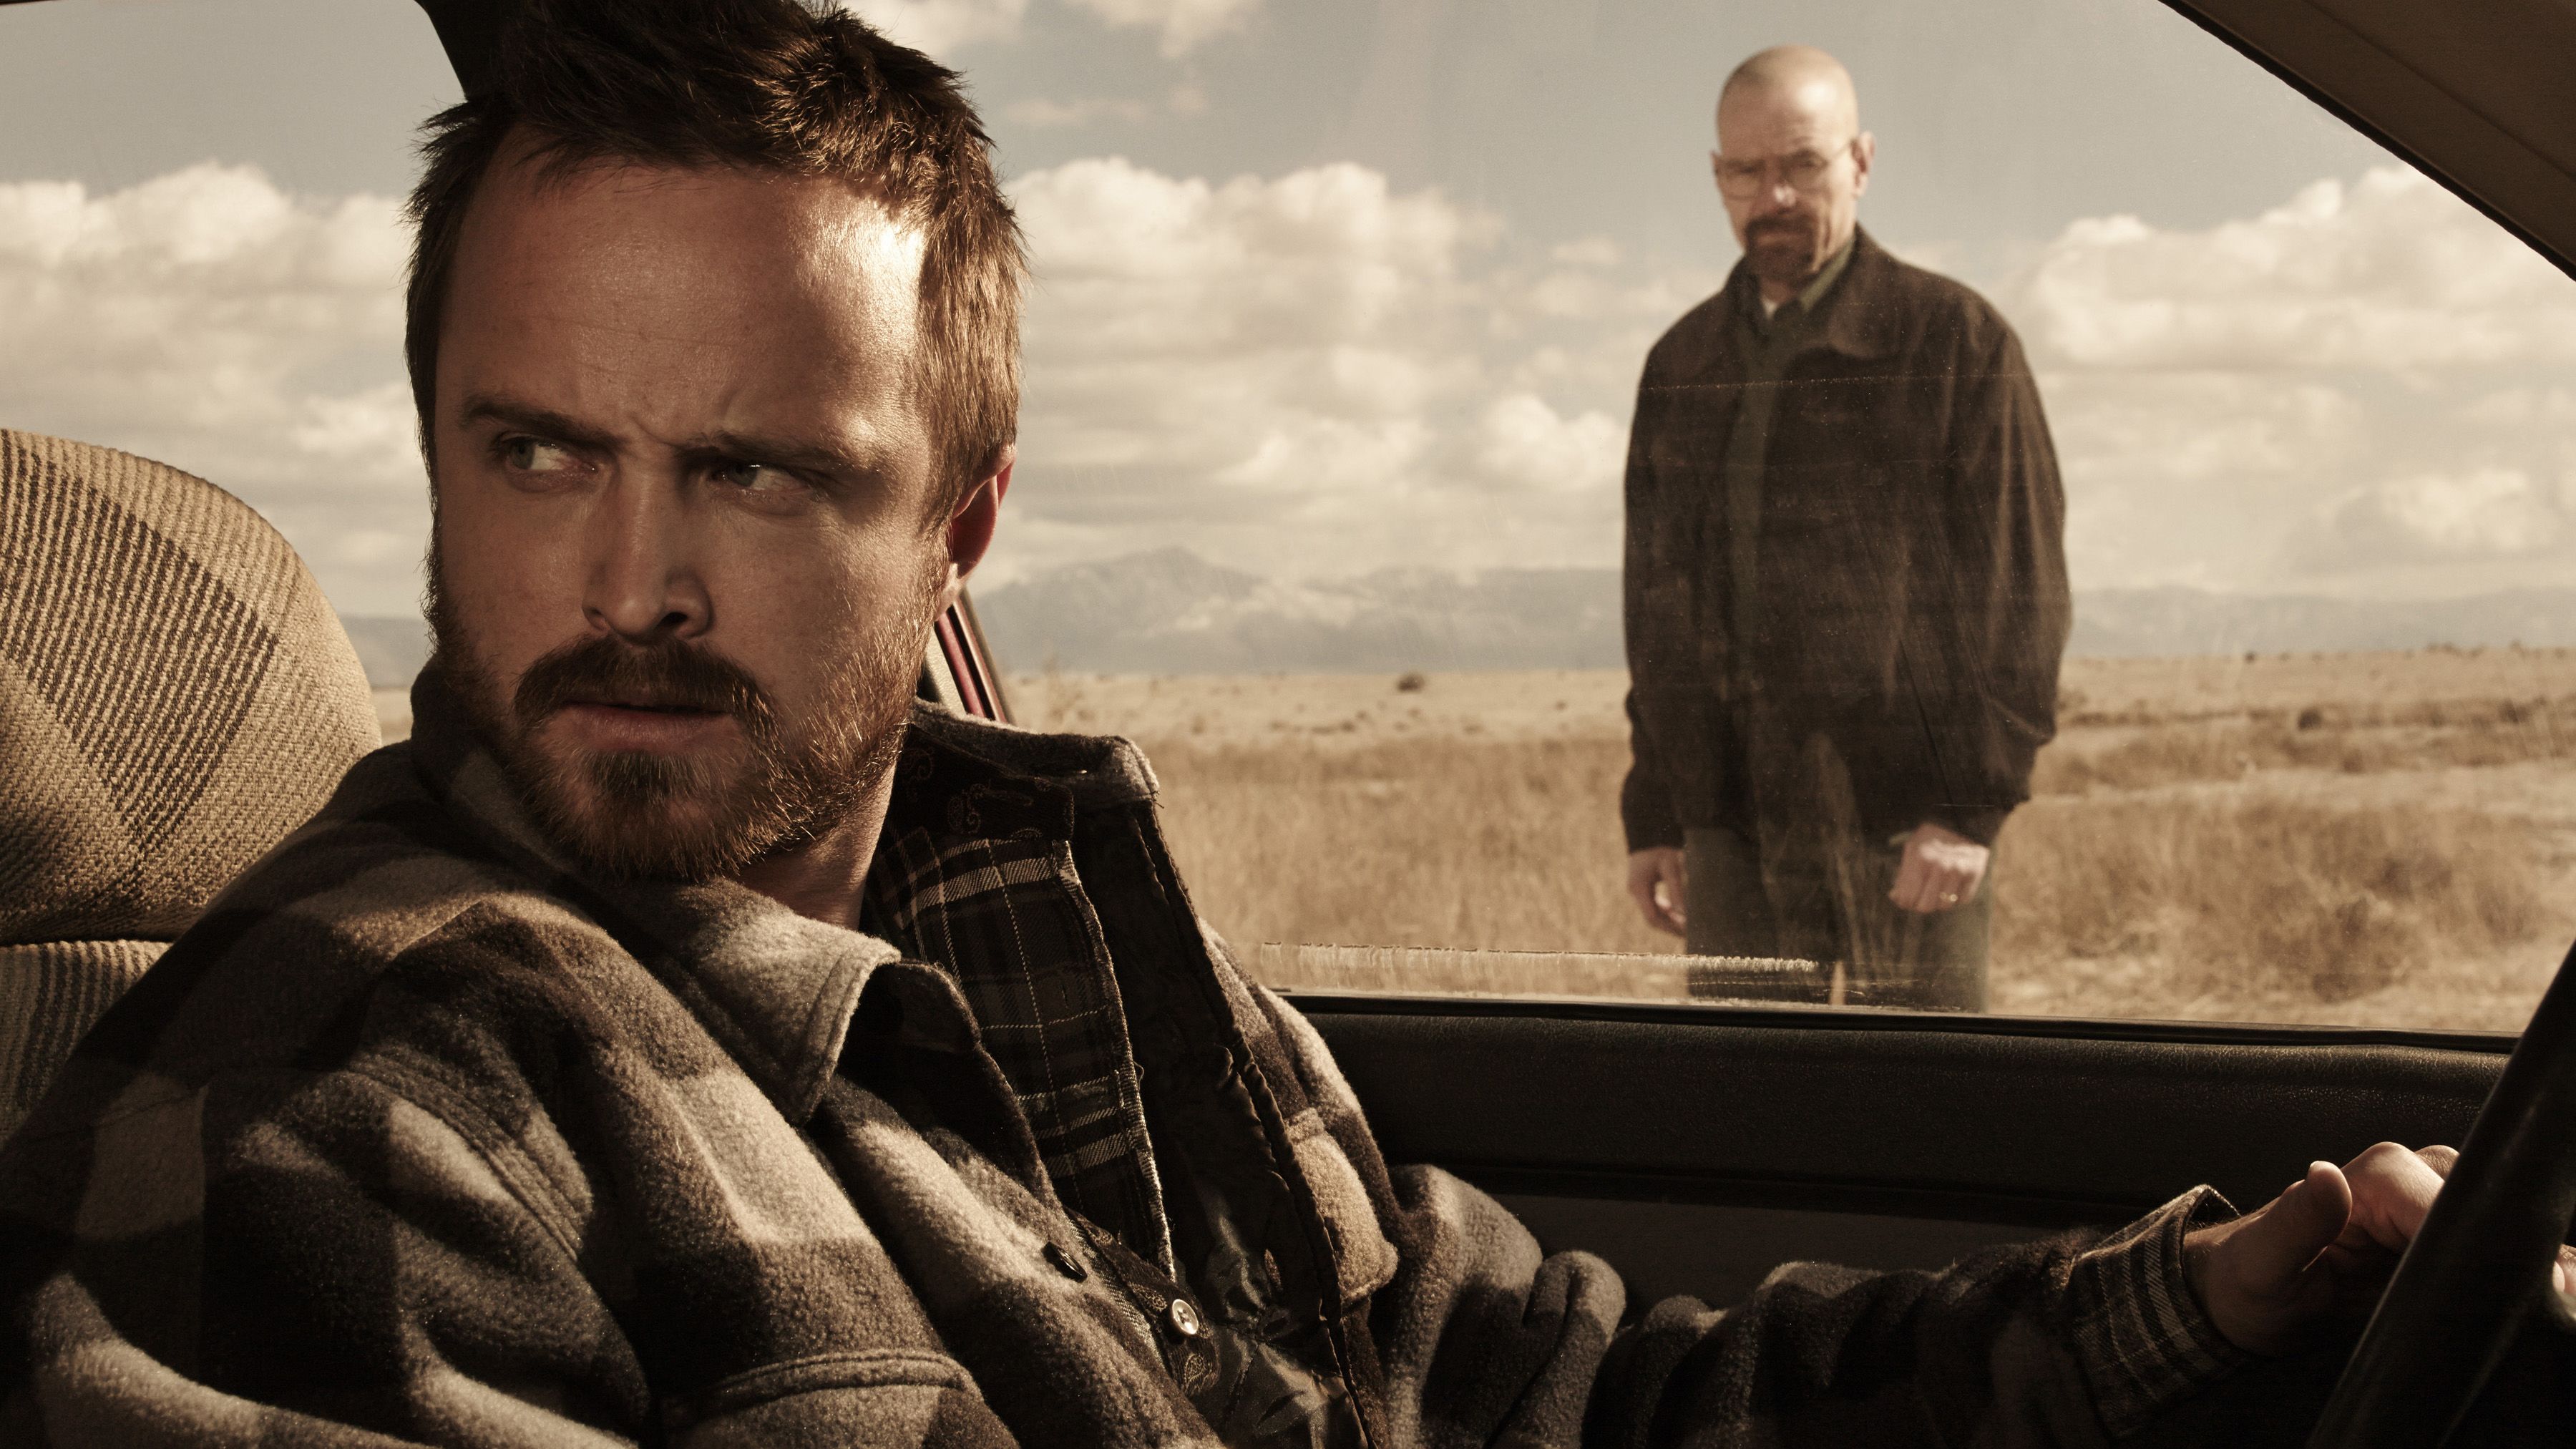 El Camino: A Breaking Bad Movie' Trailer: Jesse Pinkman's on the